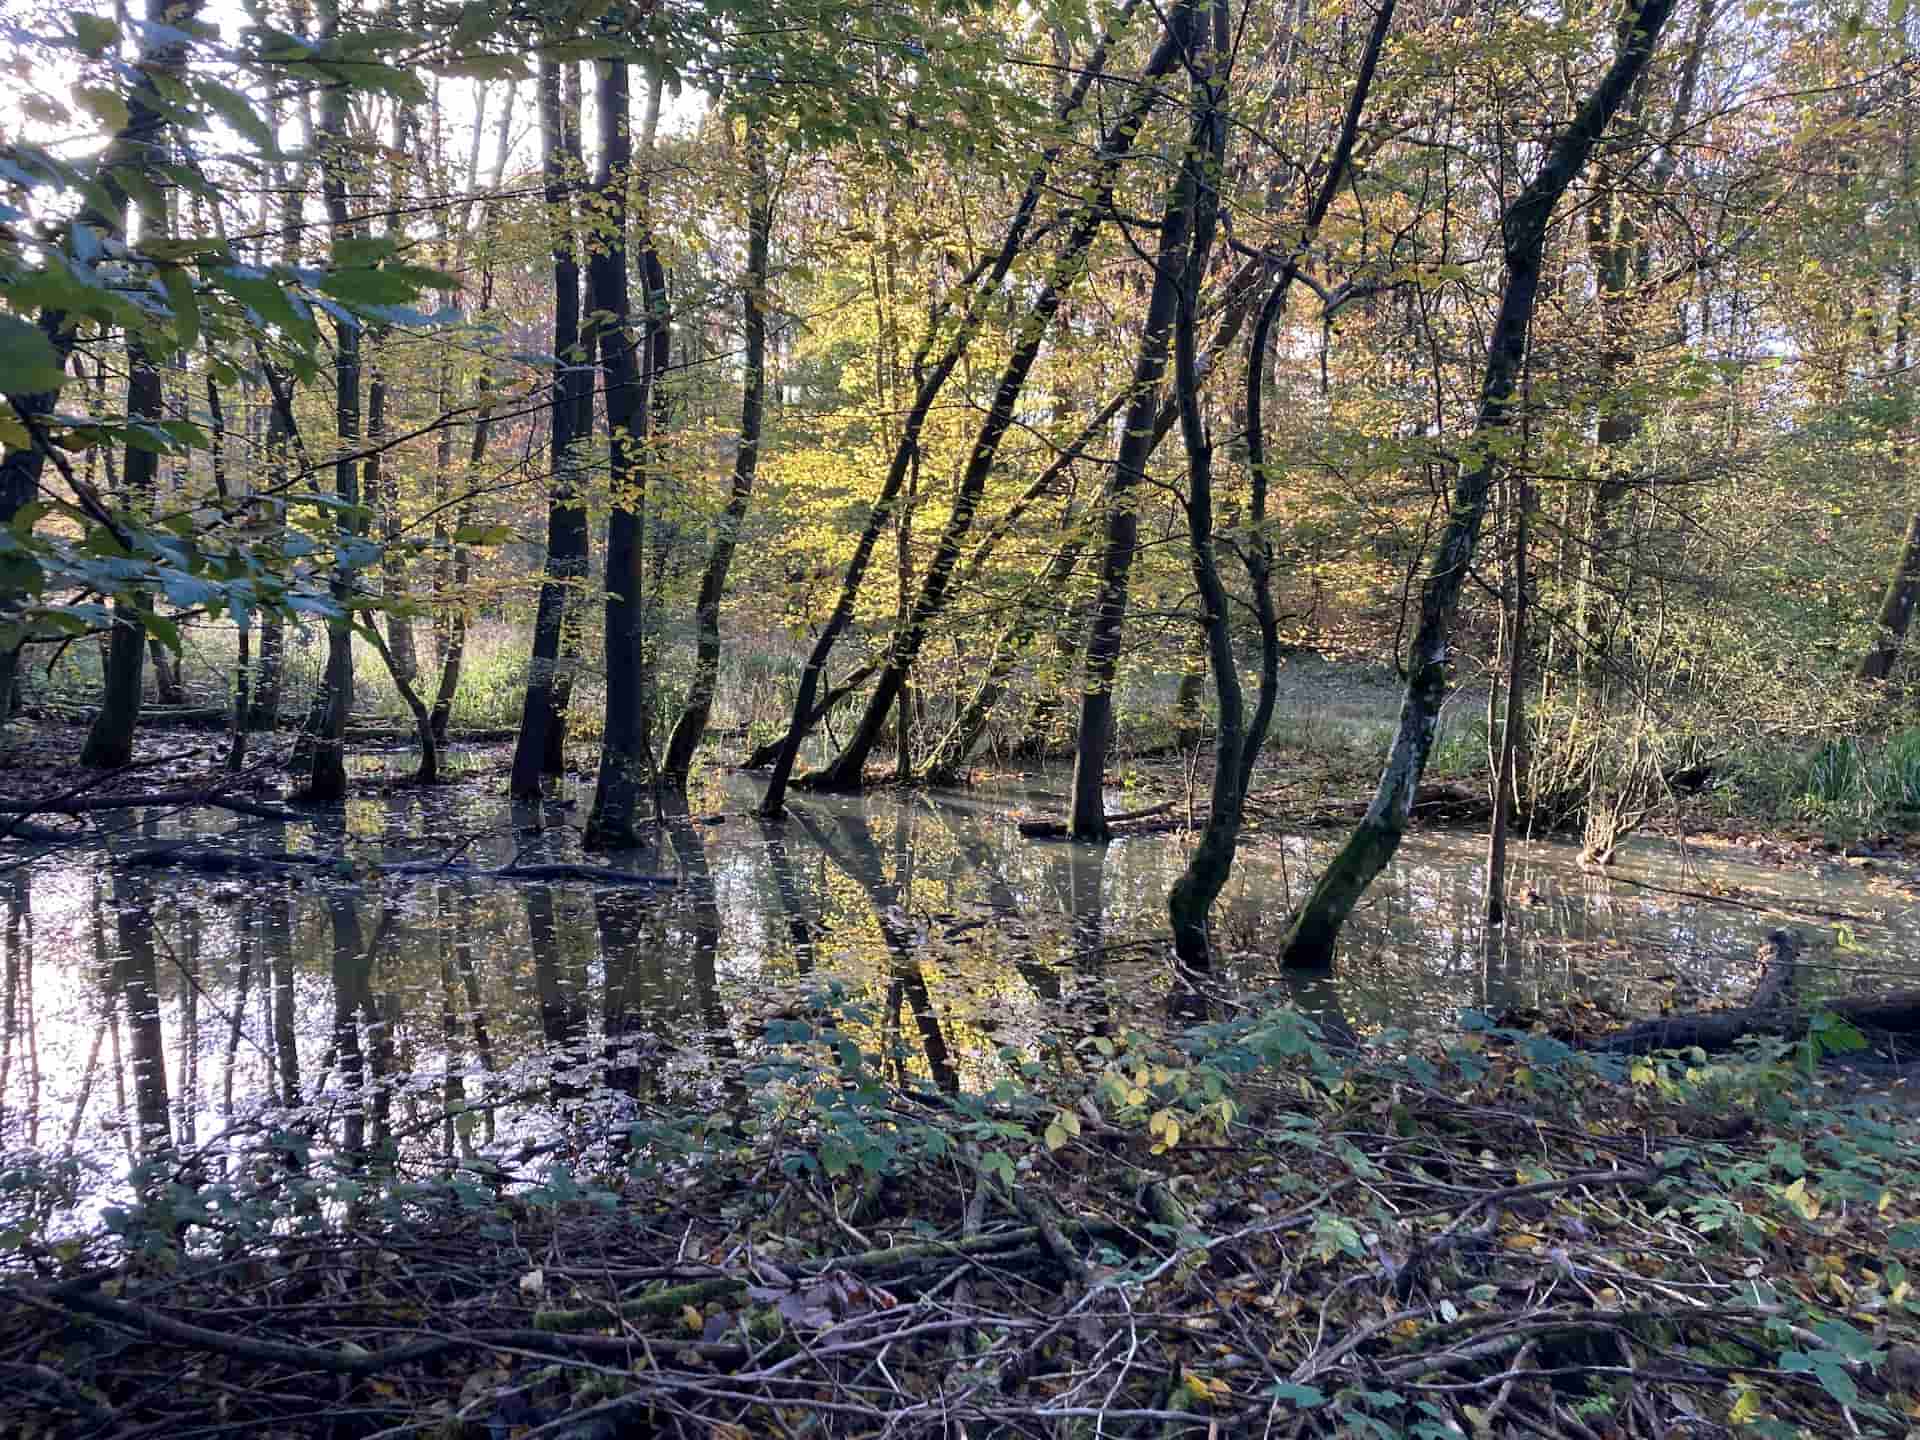 A wet woodland with trees reflecting in the water.